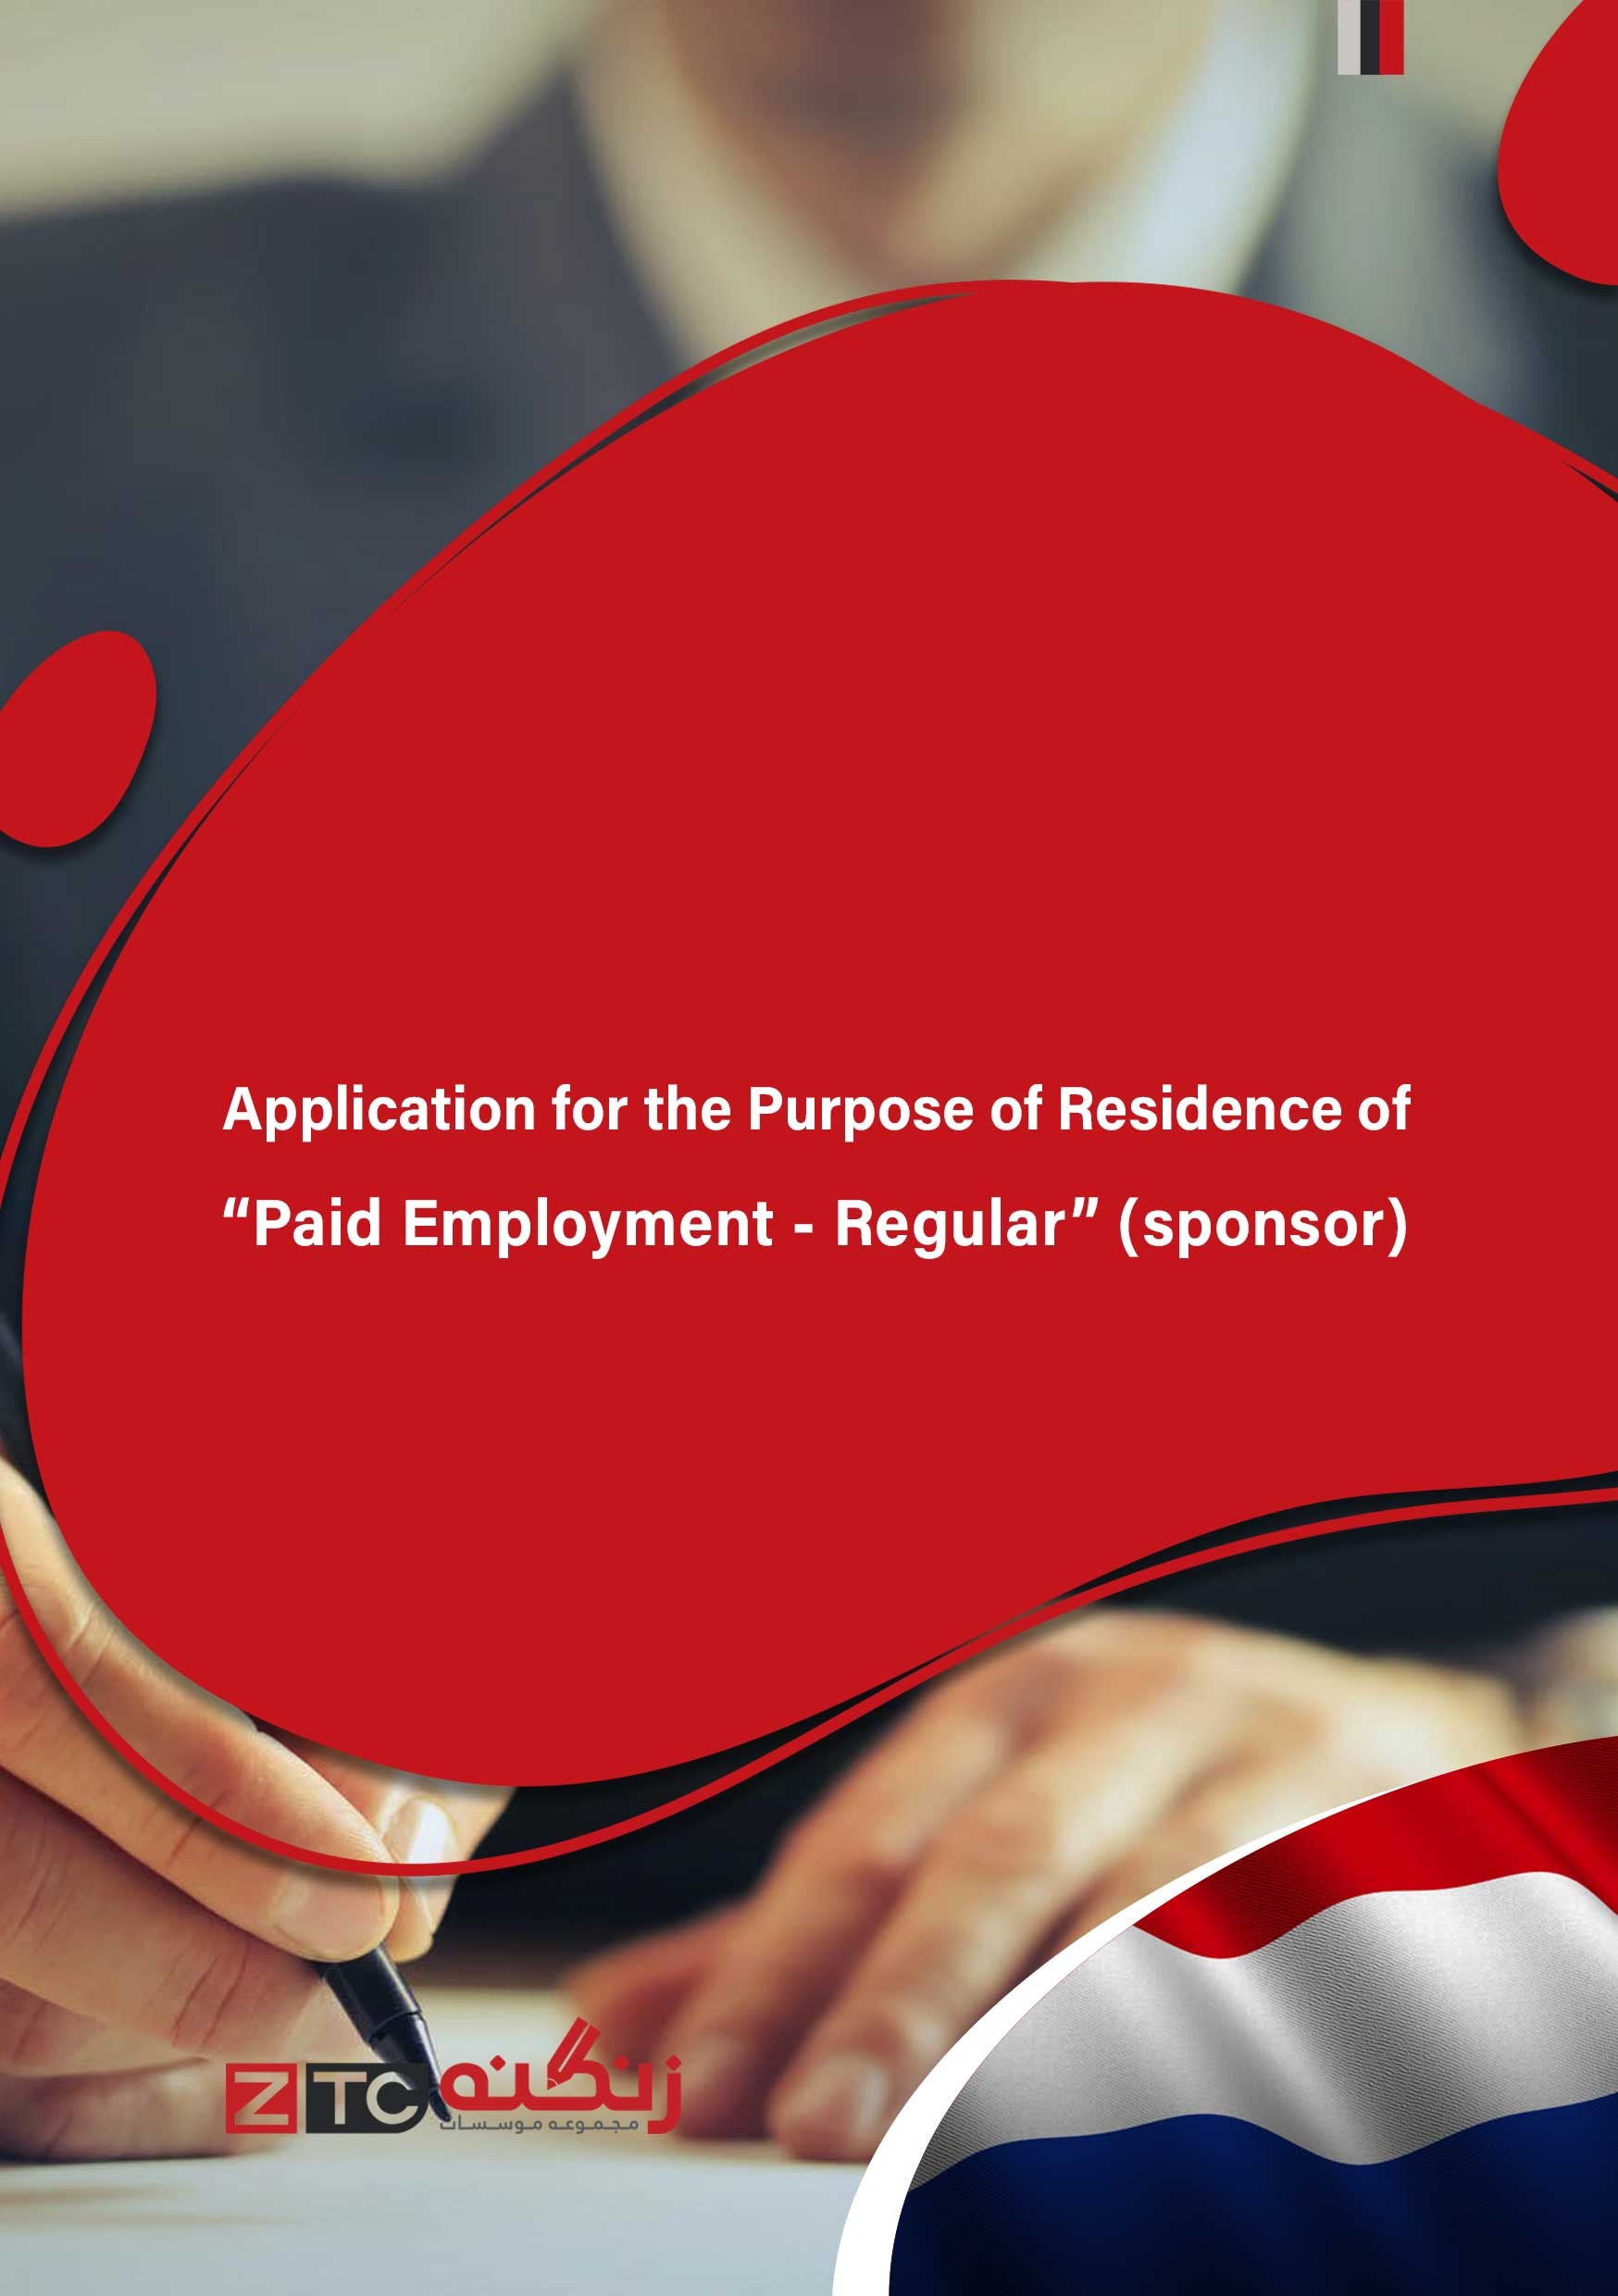 Application for the Purpose of Residence of “Paid Employment - Regular” (sponsor)